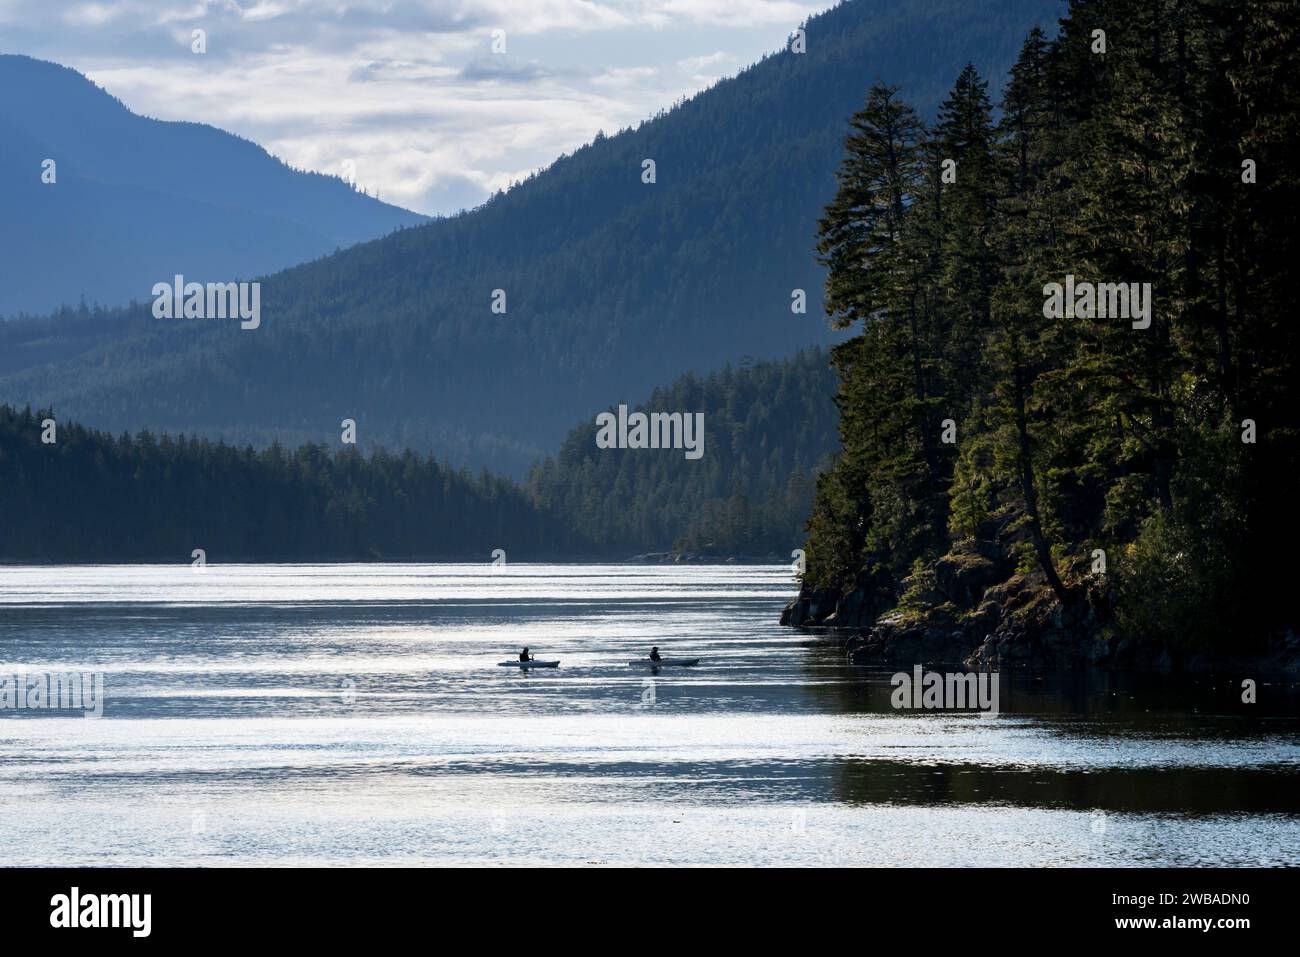 A pair of kayaking active seniors paddle on calm water past mountains and forest near Vancouver Island, British Columbia, Canada Stock Photo